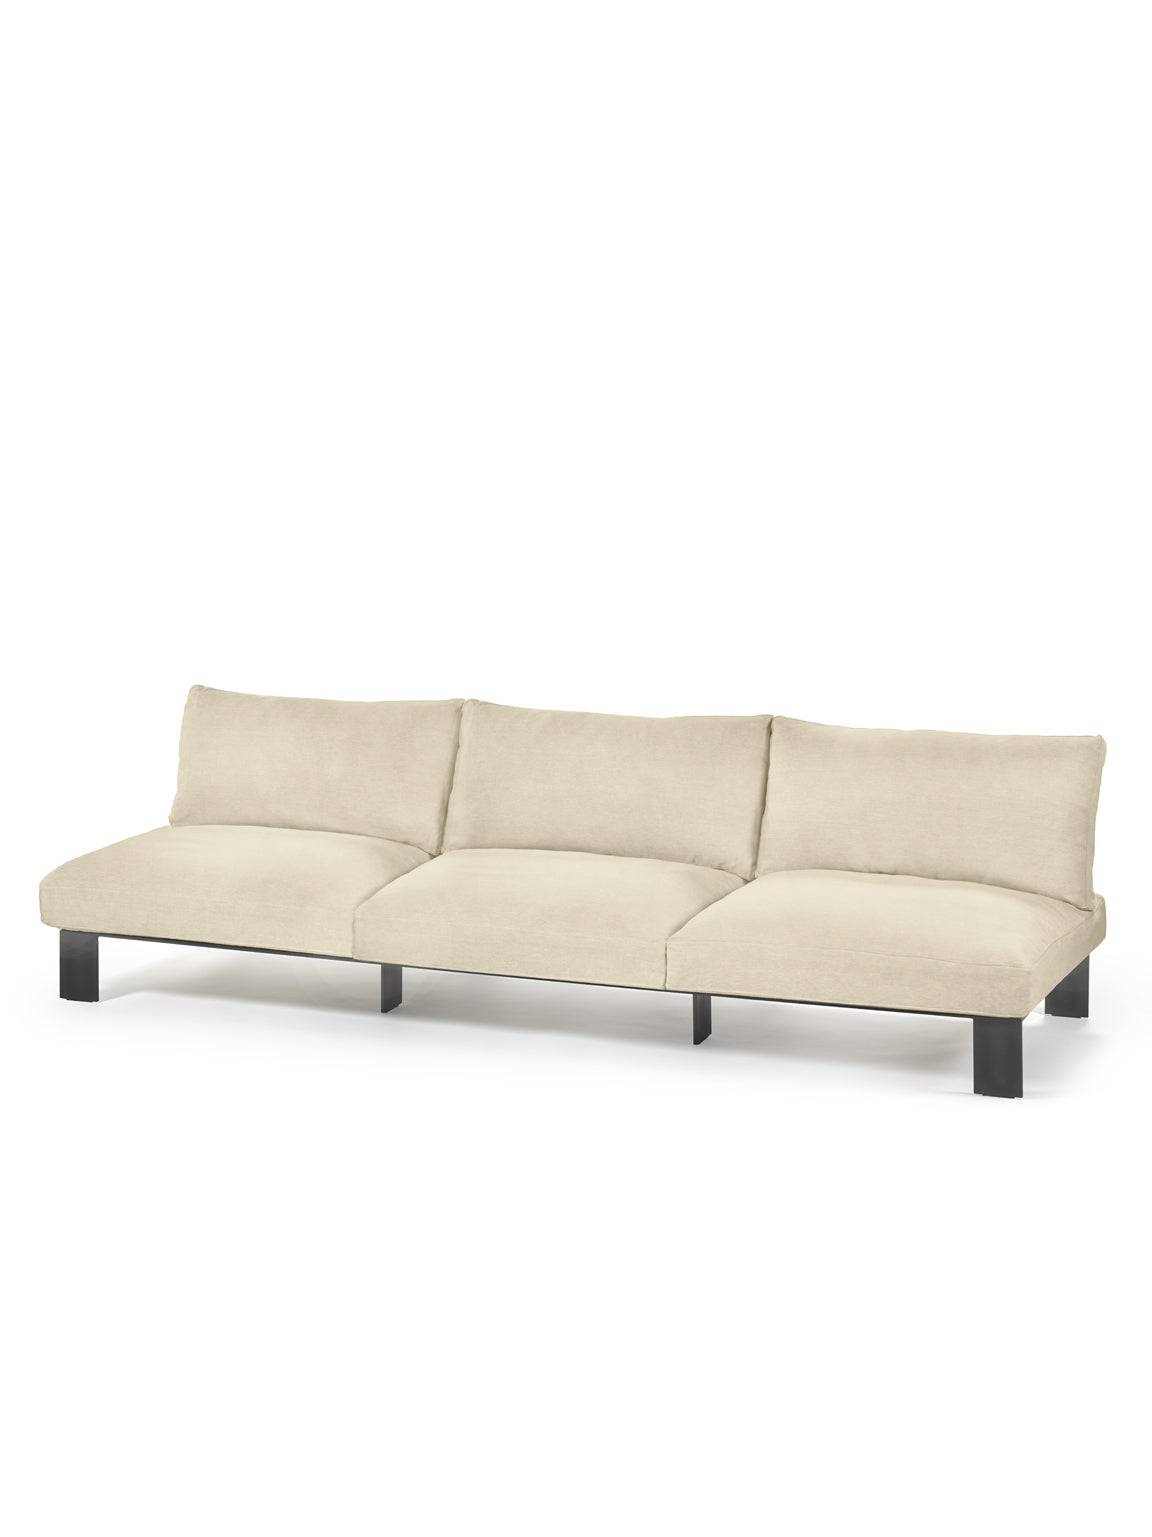 Mombaers Sofa - Natural - THAT COOL LIVING